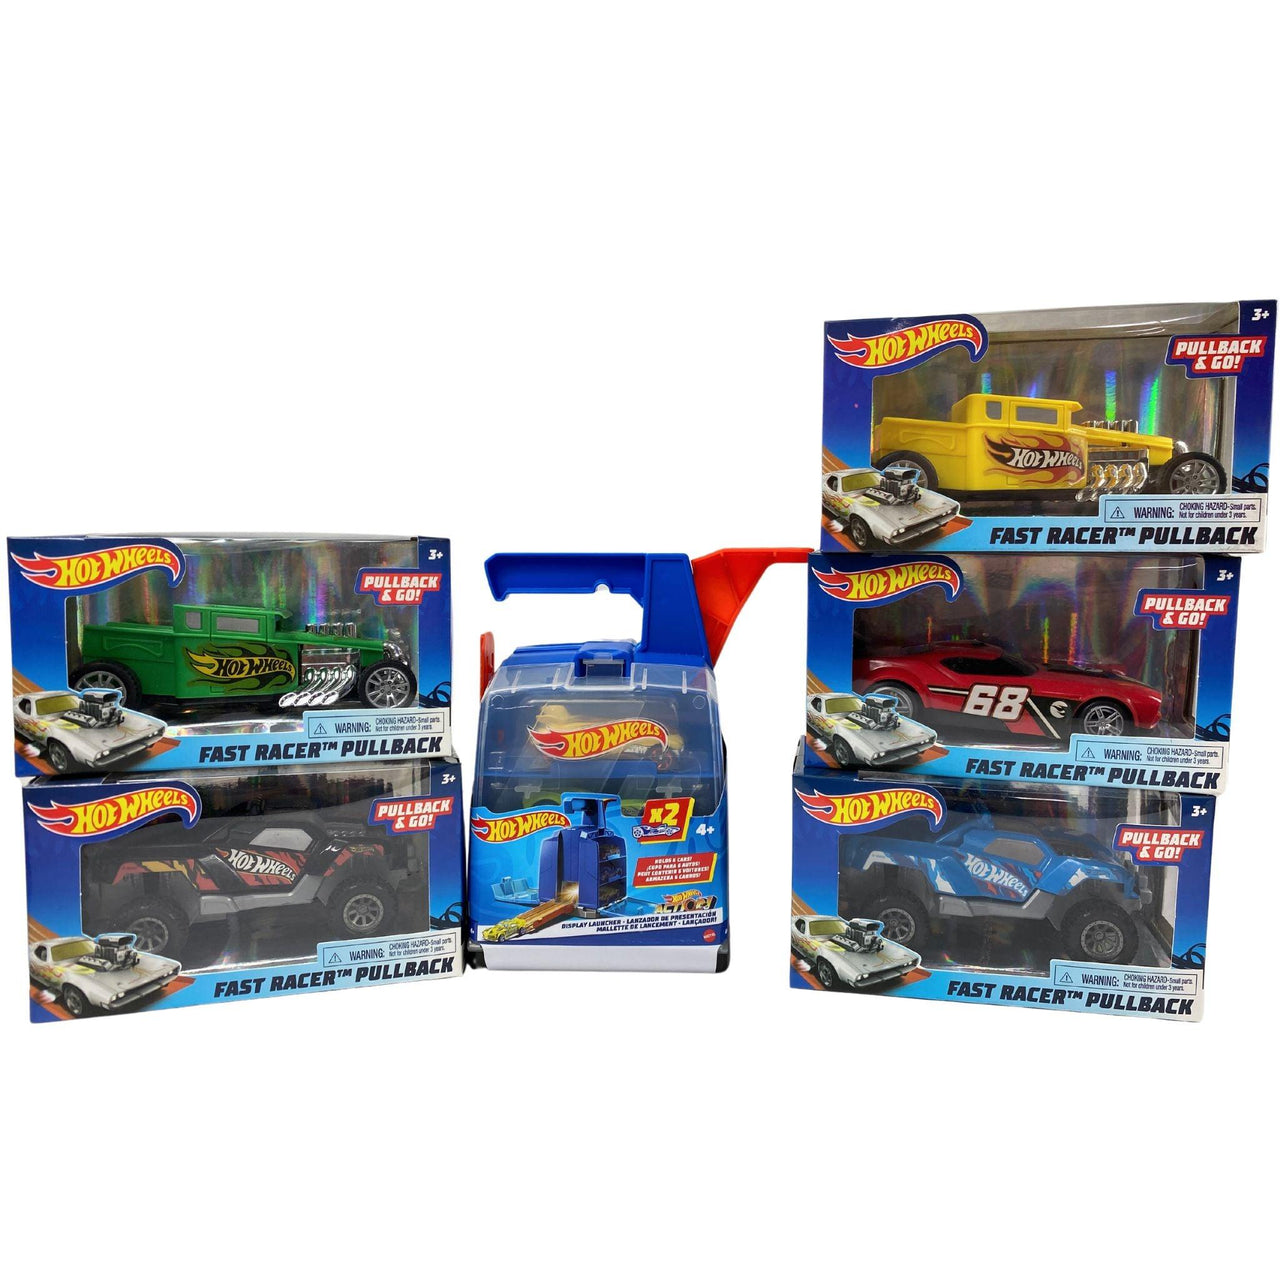 Hot Wheels Mix Fast Racer Pullback Assorted Cars(MAINLY) & Hot Wheels Display Launcher (38 Pcs Lot) - Discount Wholesalers Inc